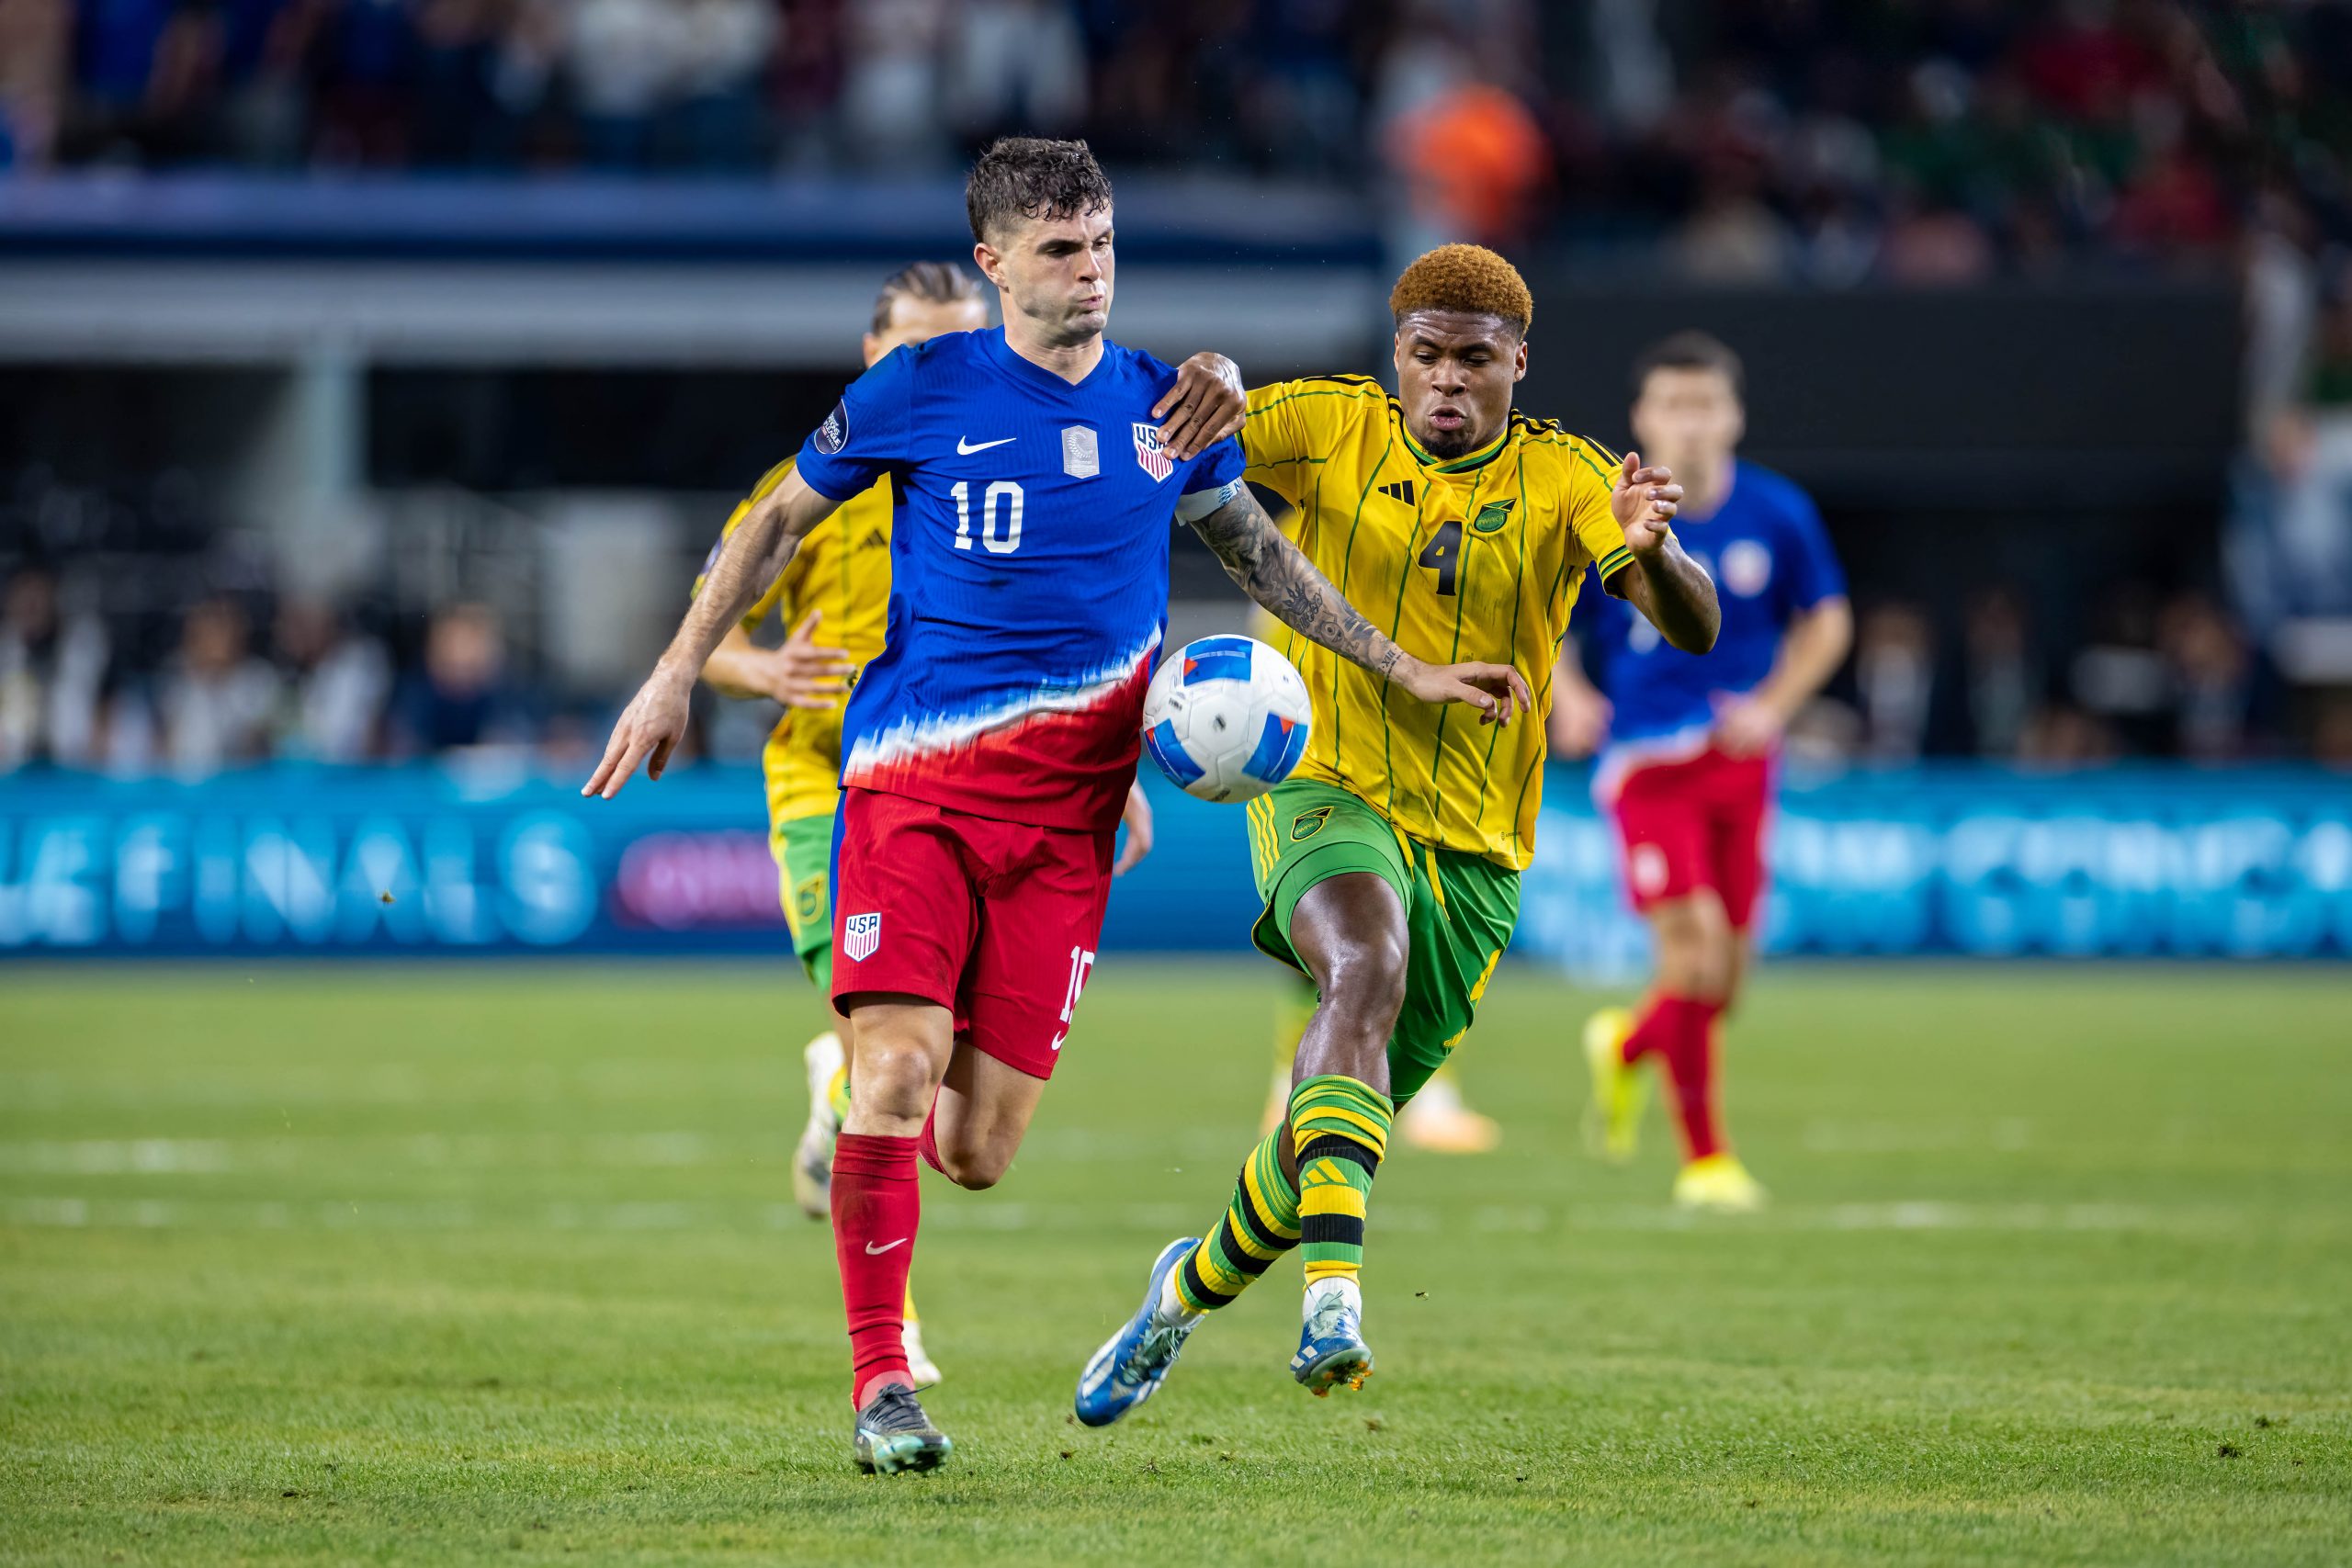 Christian Pulisic charges upfield as the he US Men's National team knocks off Jamaica 3-1 in the Concacaf Nations League on March 21, 2024, at AT&T Stadium in Arlington, Texas. (Matt Visinsky, 3rd Degree)